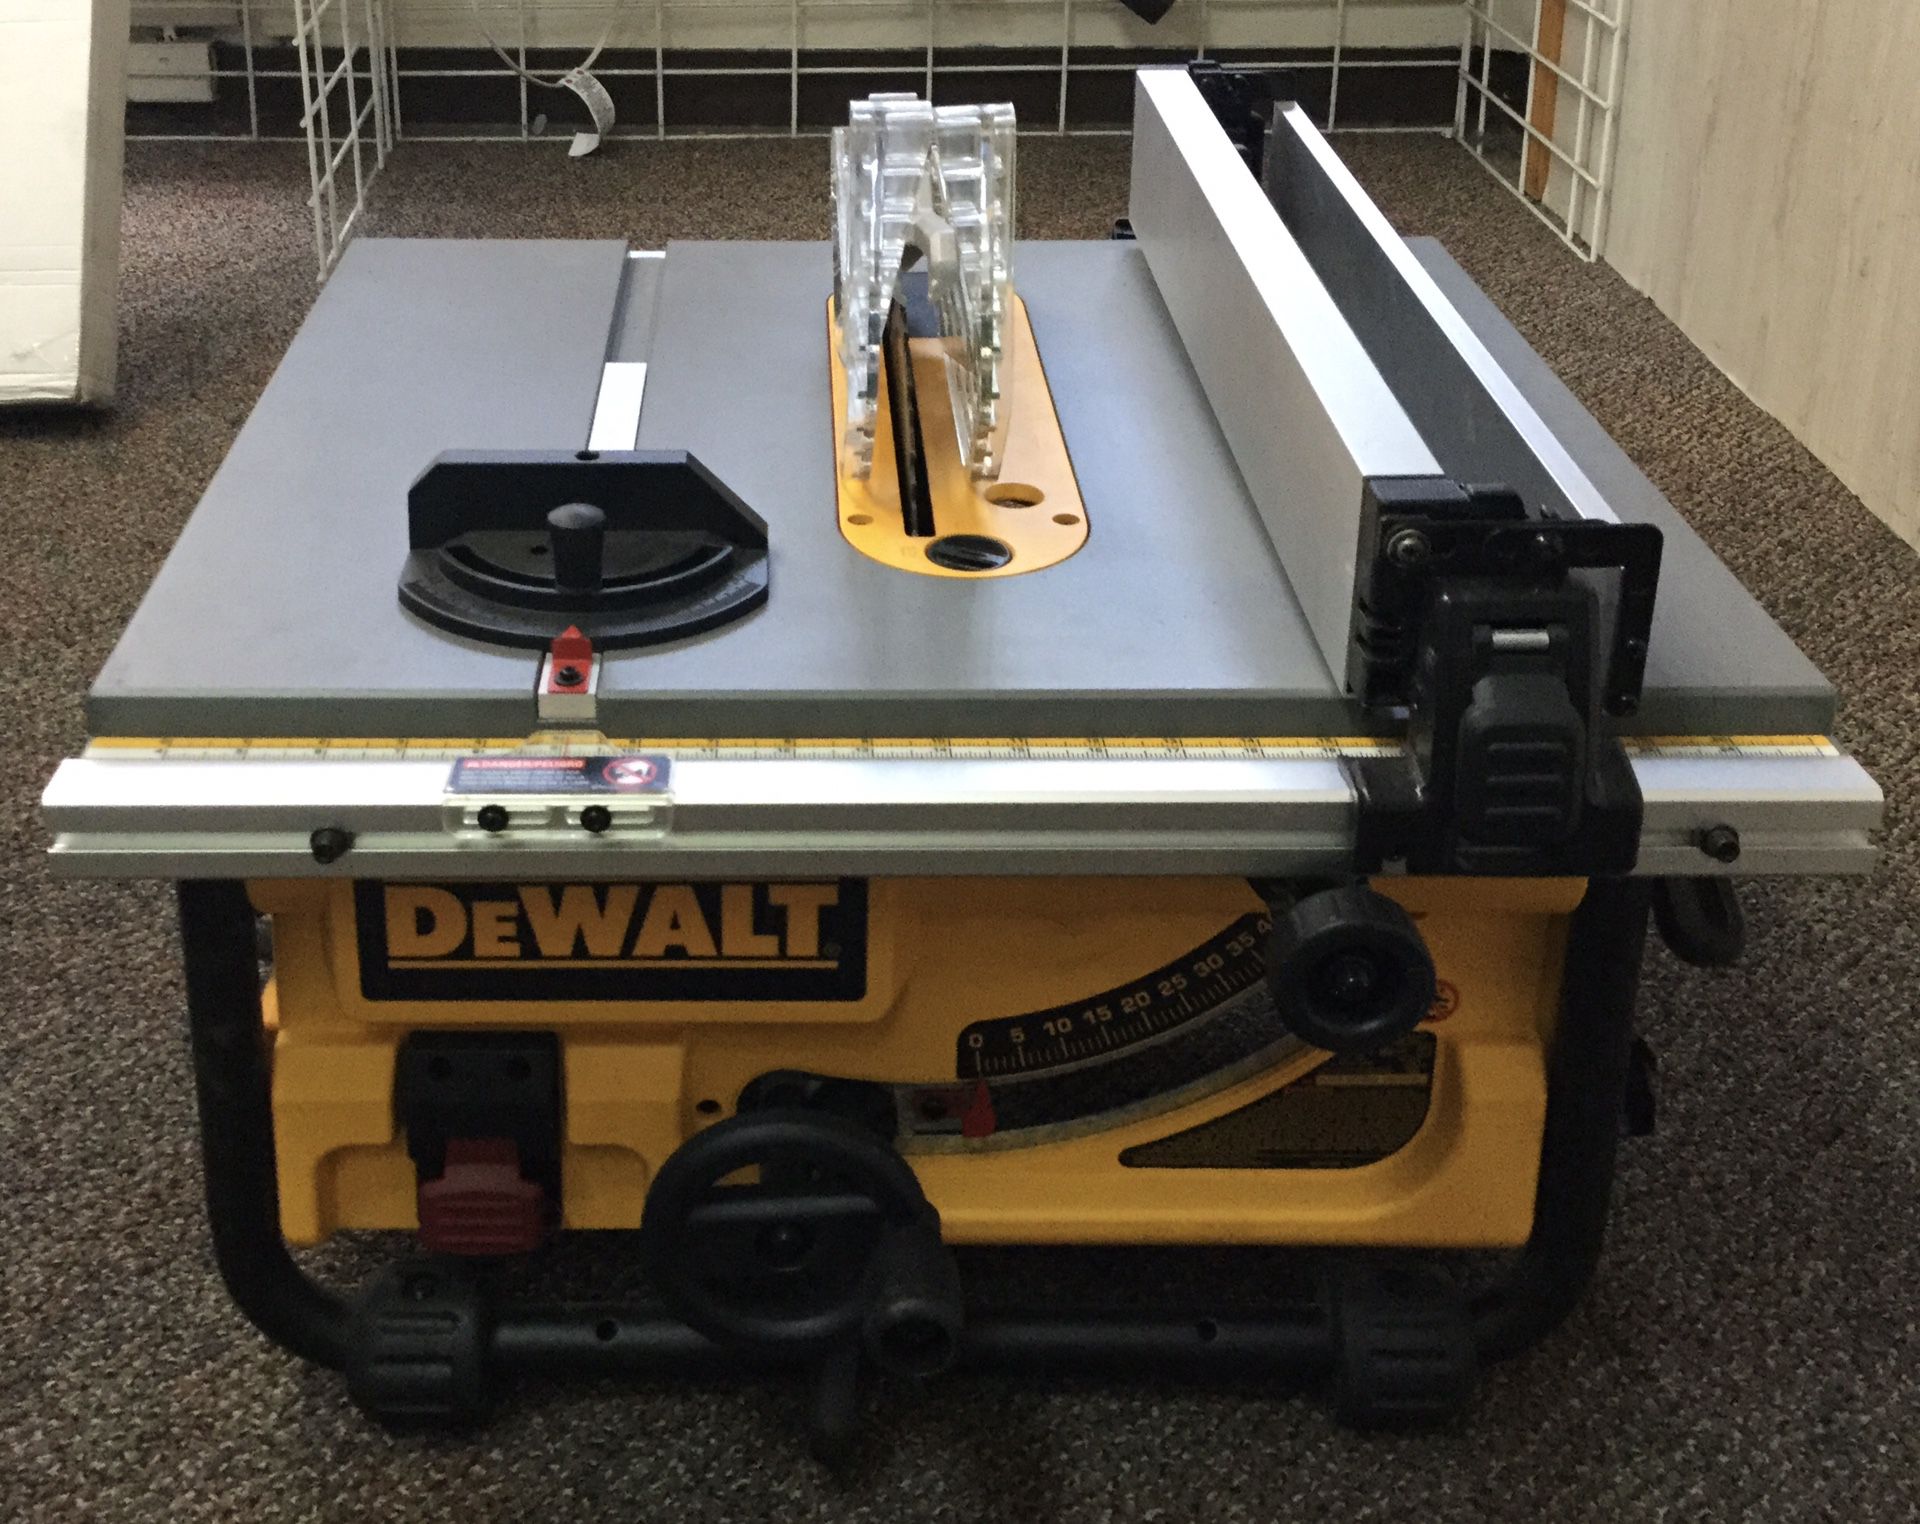 Dewalt Table Saw With Blade Guard And Leval